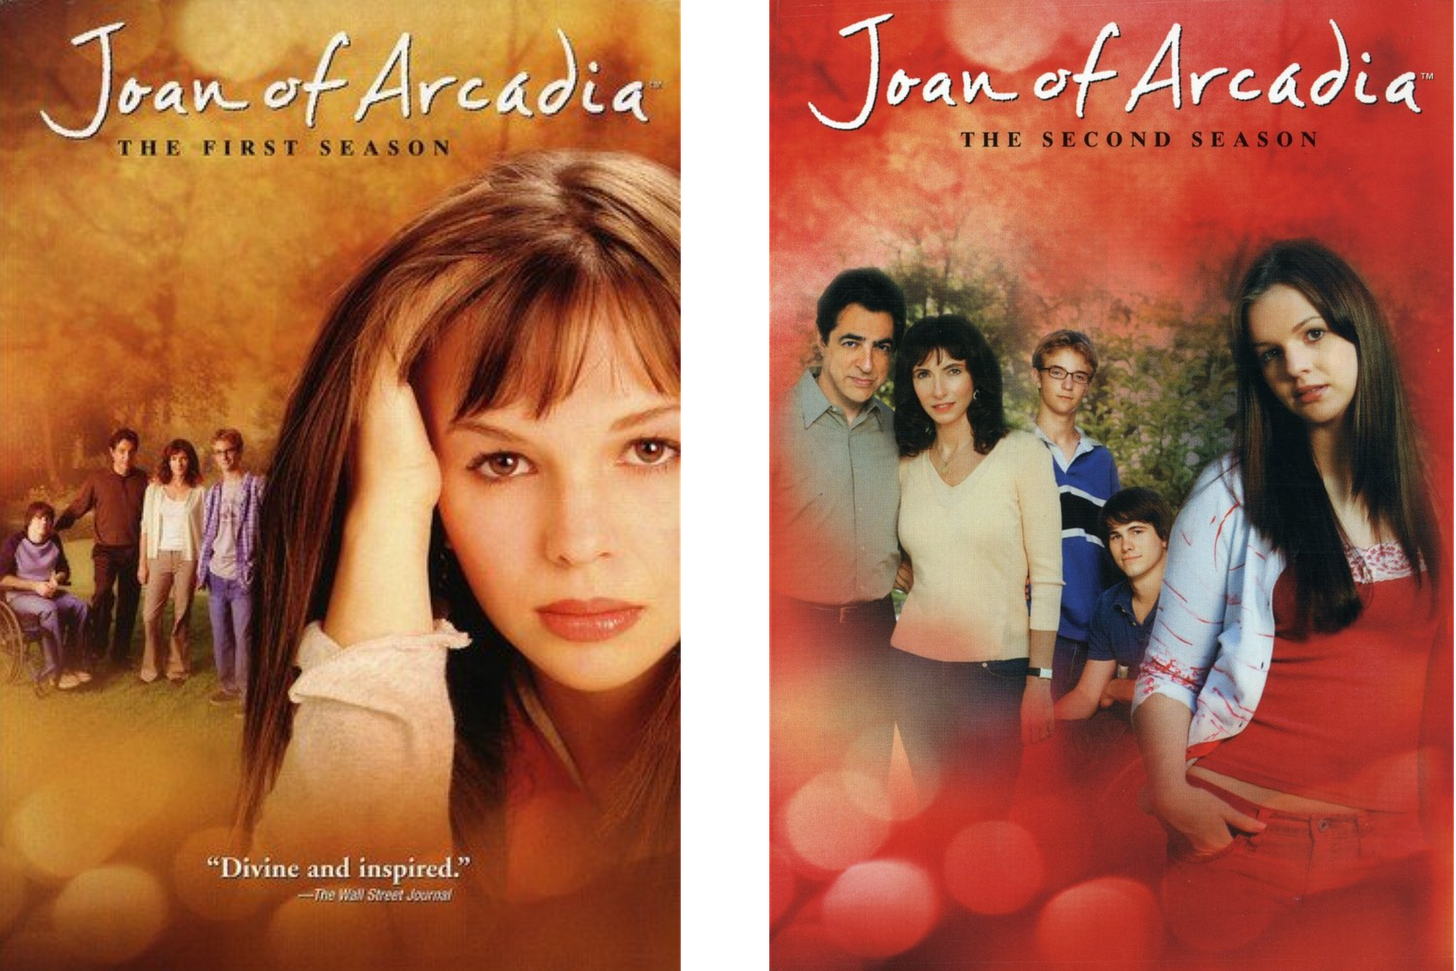 Left, the season 1 promotional poster for "Joan of Arcadia." Right, the season 2 promotional poster for "Joan of Arcadia"